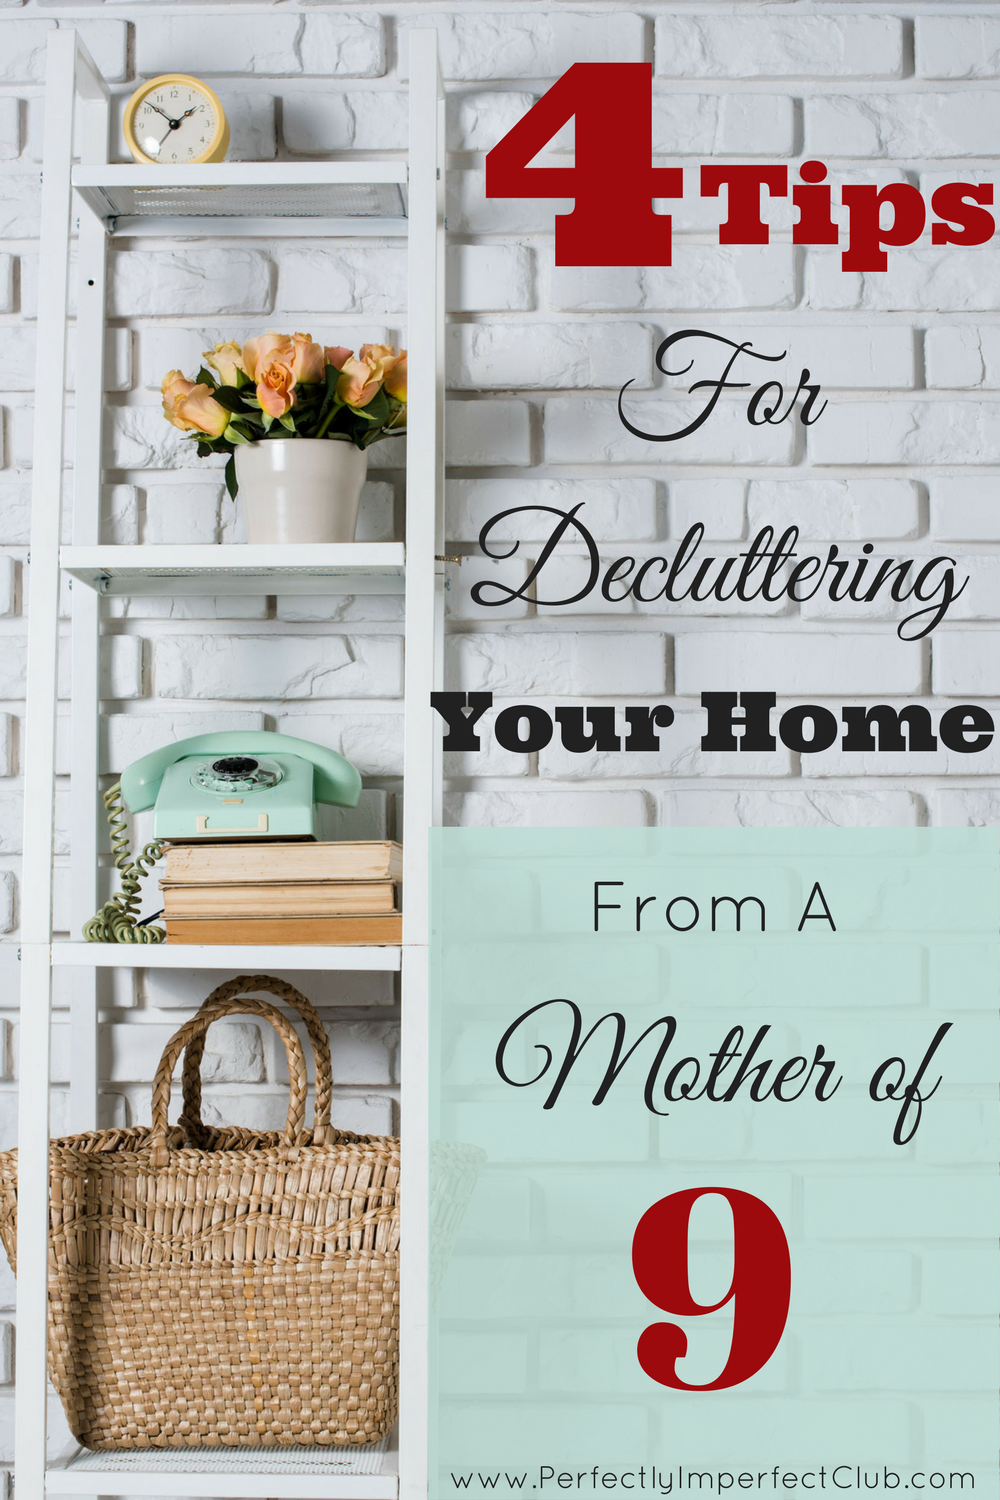 Decluttering tips from a mother of 9 that really work!|Large Family|Decluttering